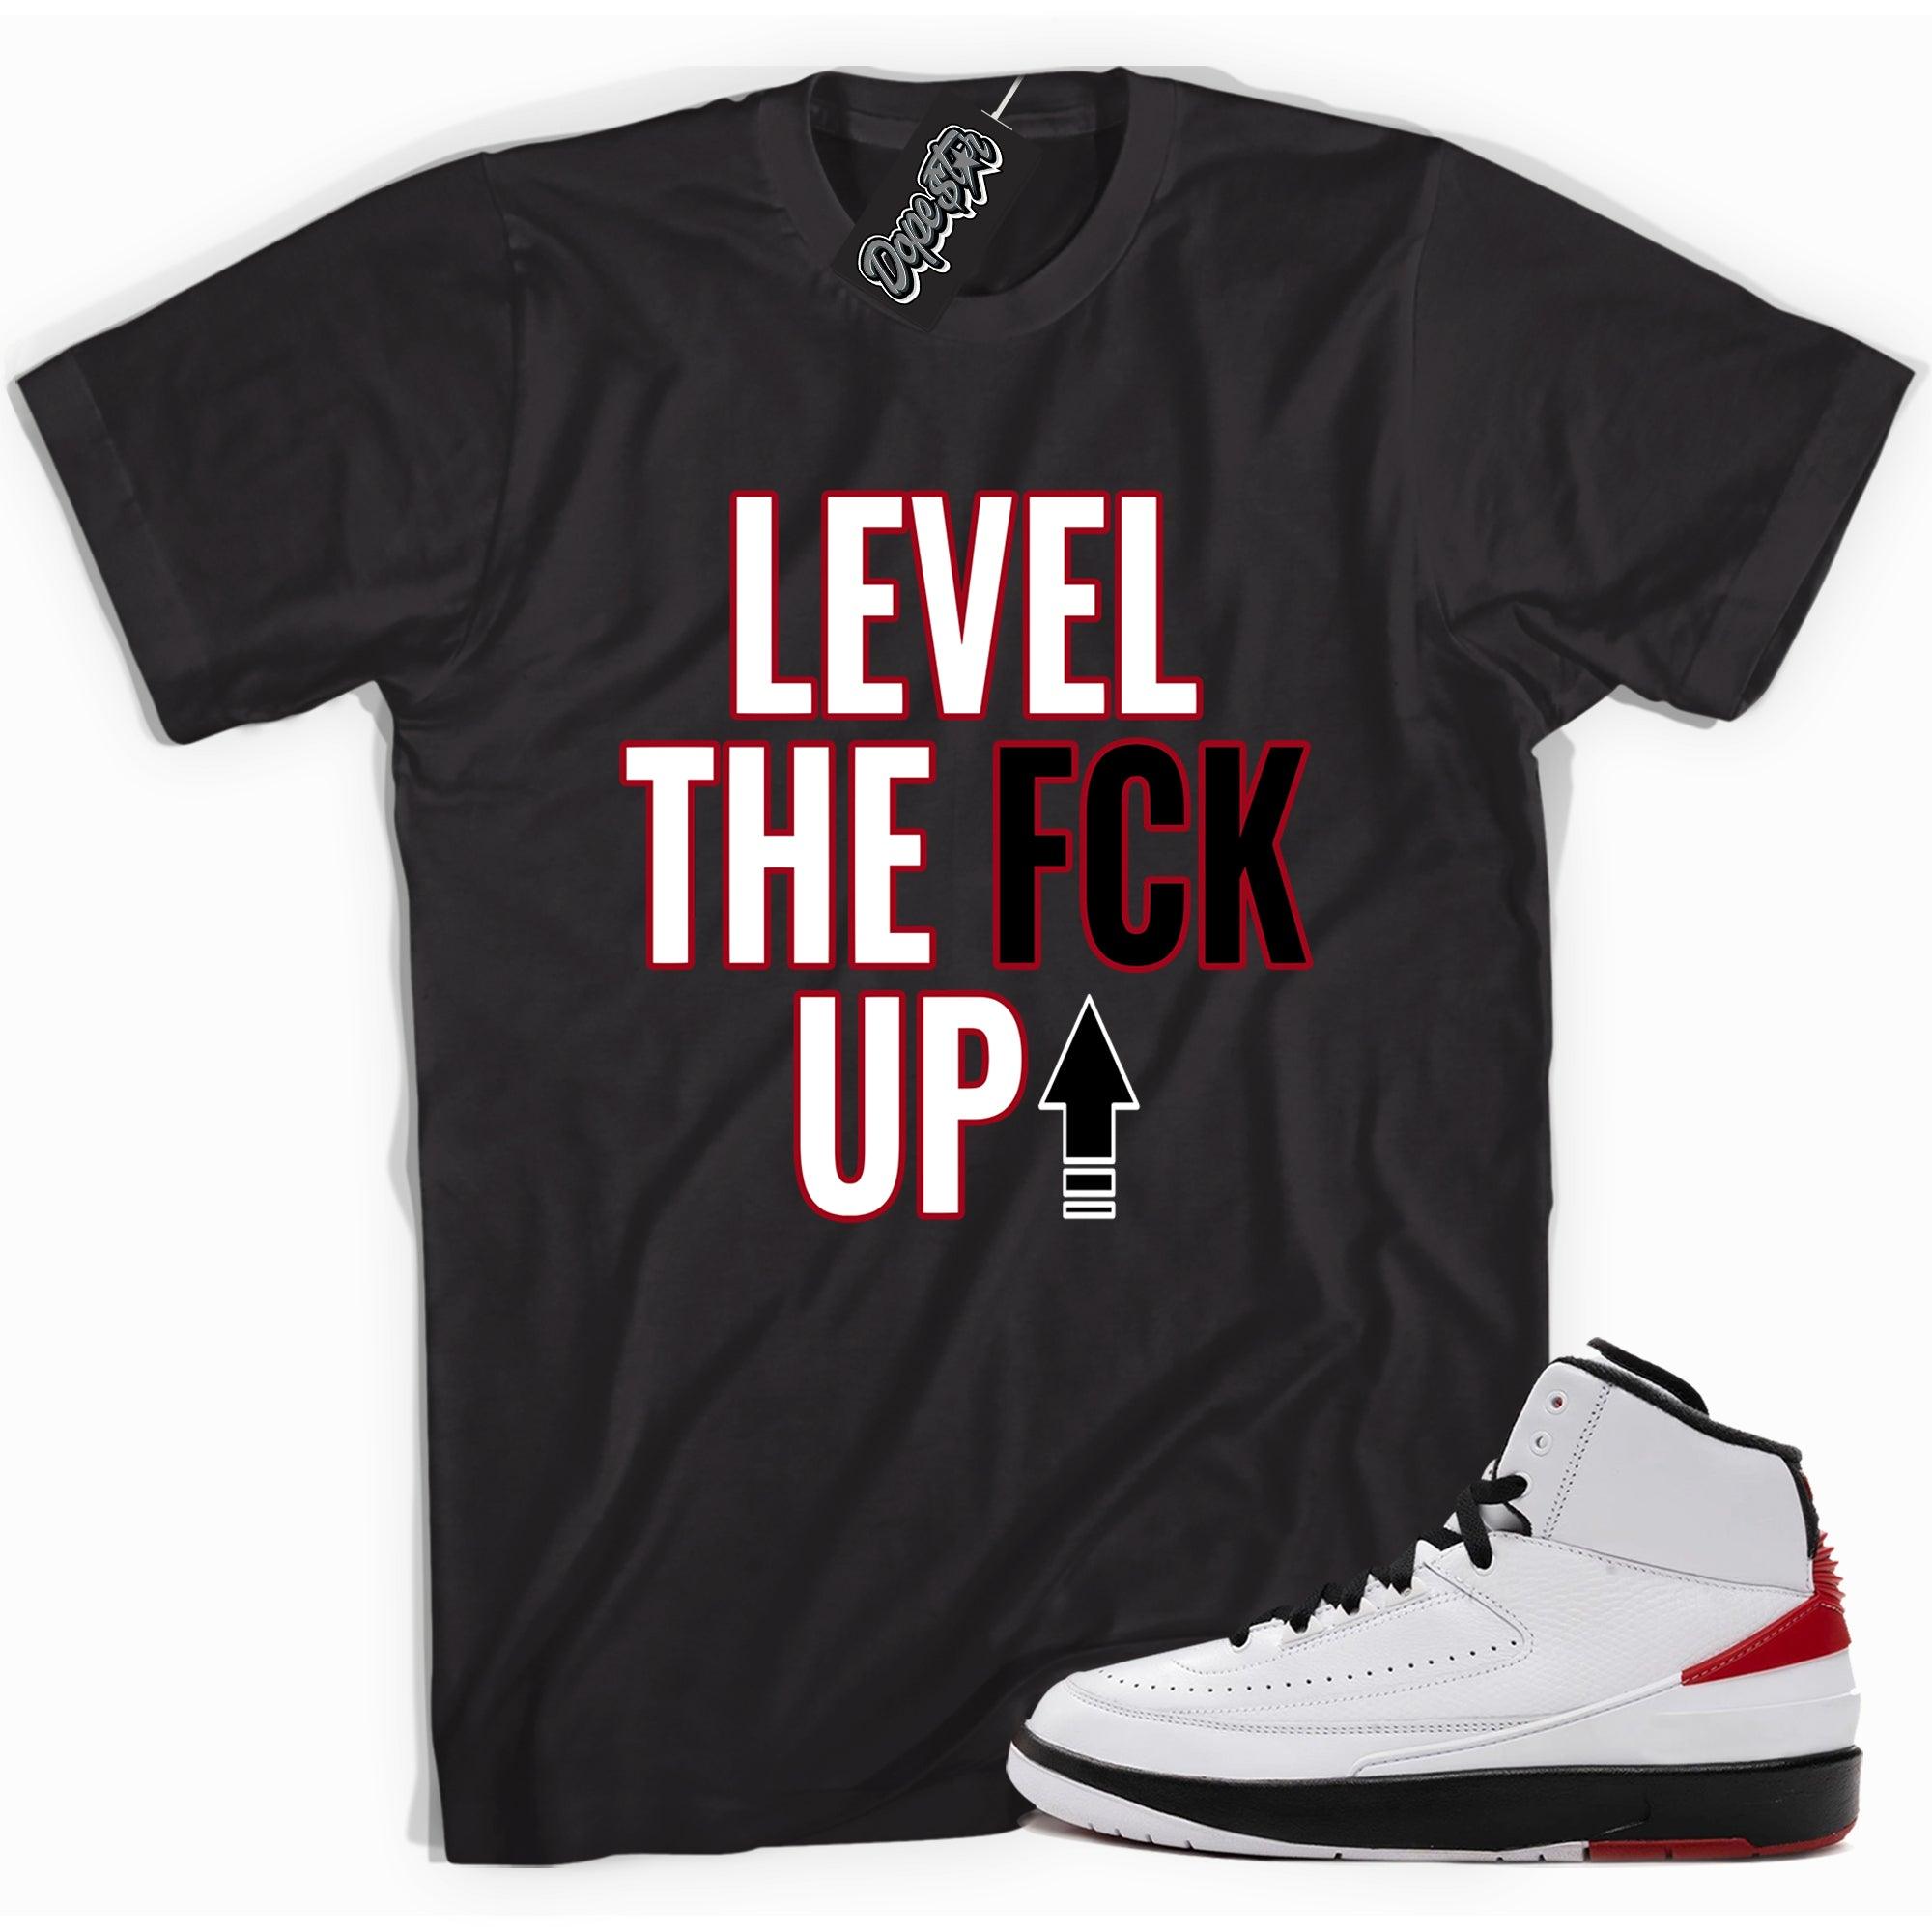 Cool black graphic tee with 'Level Up' print, that perfectly matches Air Jordan 2 Retro OG Chicago sneakers.